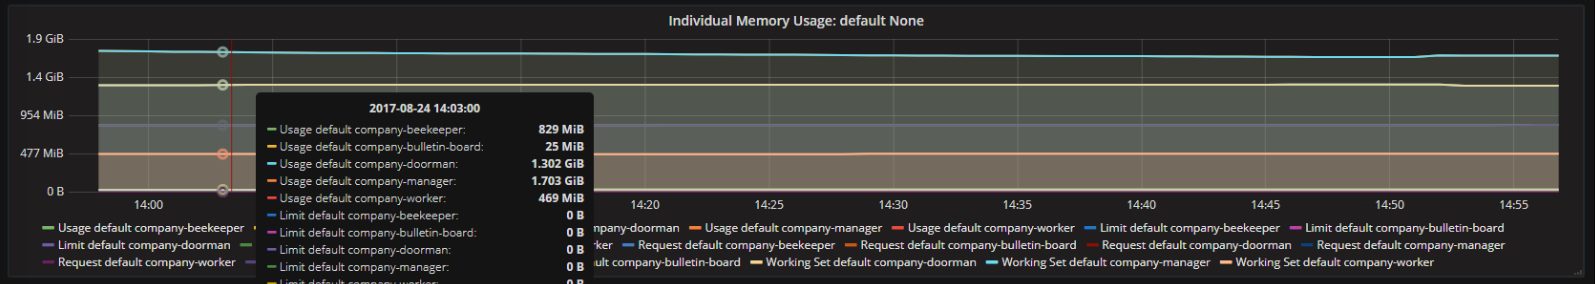 fig-6 Memory Usage of different services